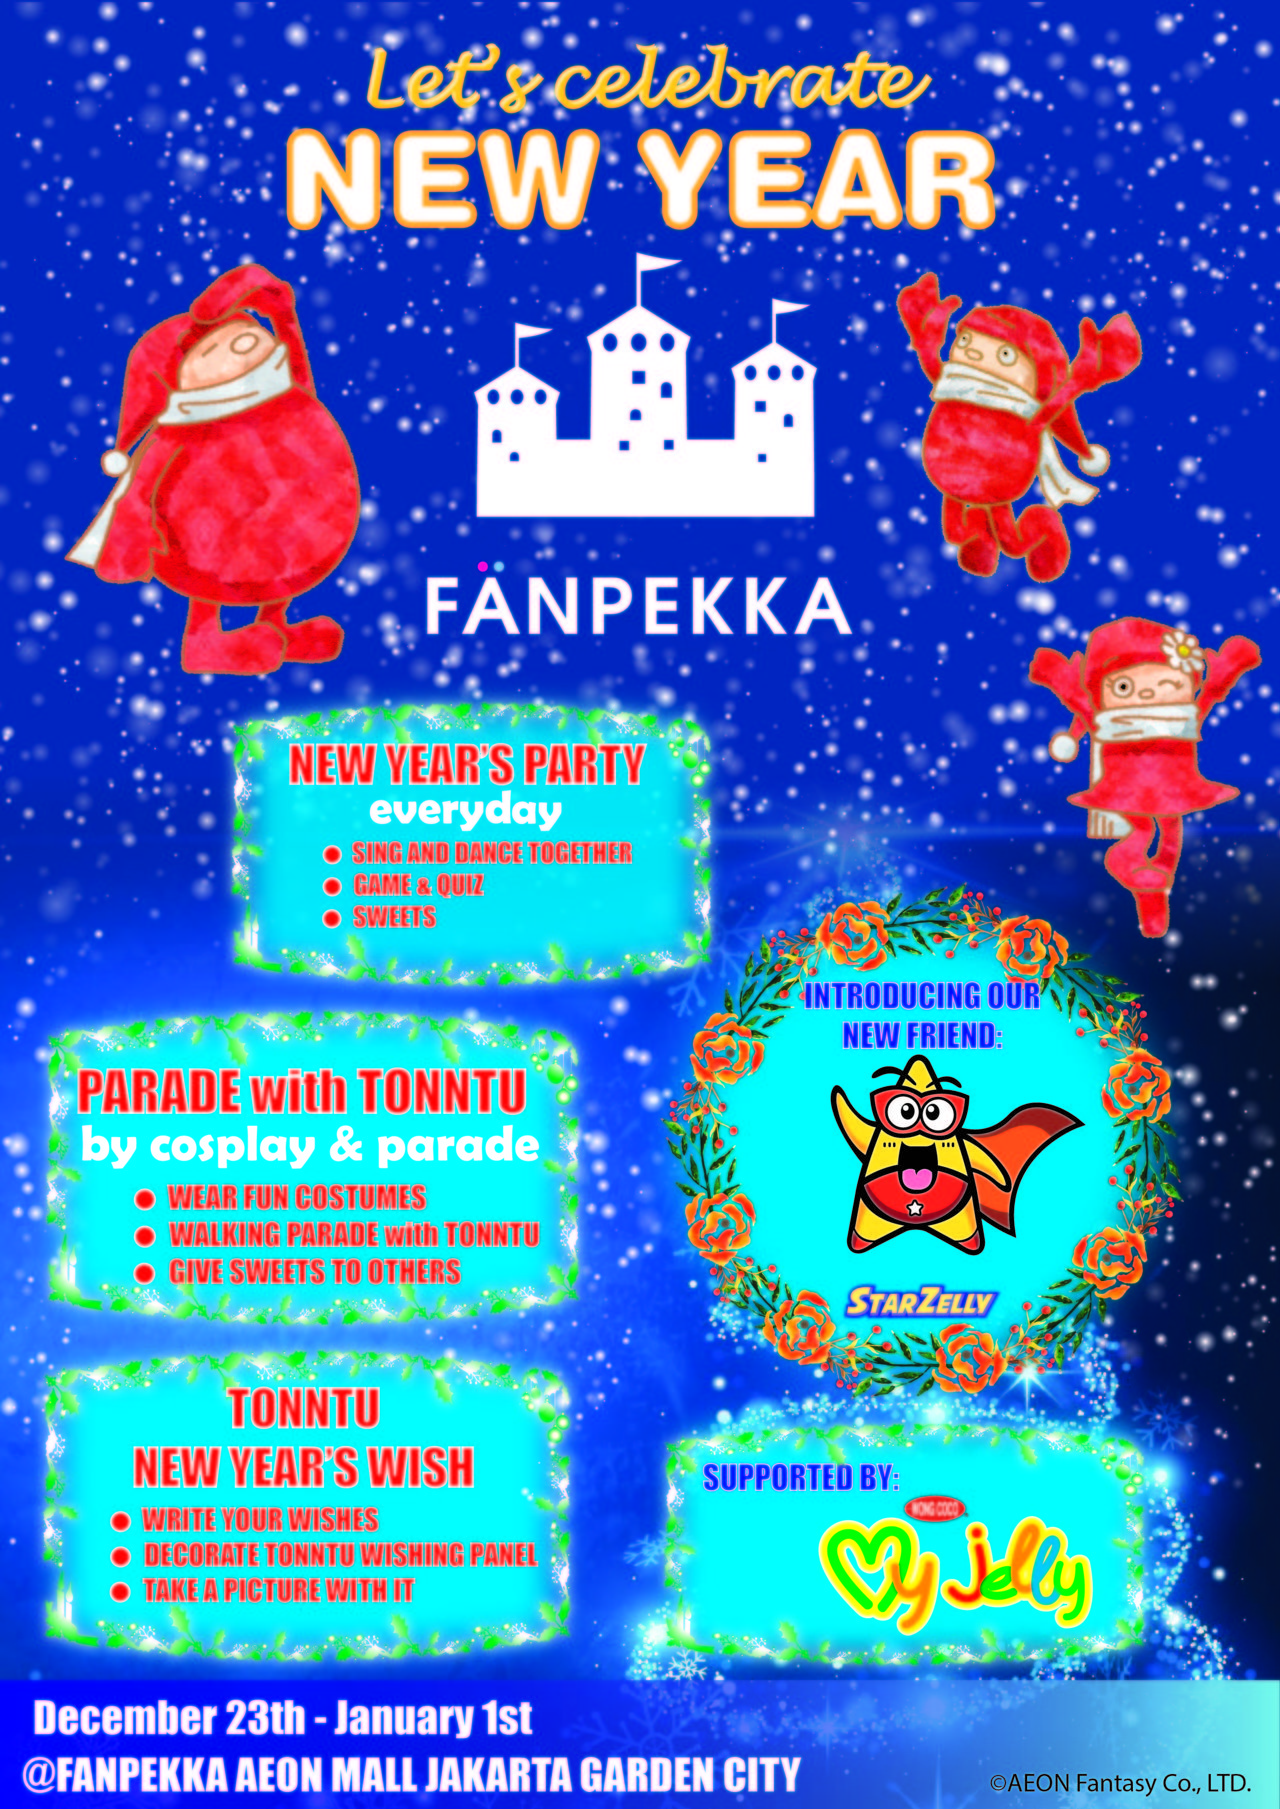 Let's Celebrate New Year with FANPEKKA